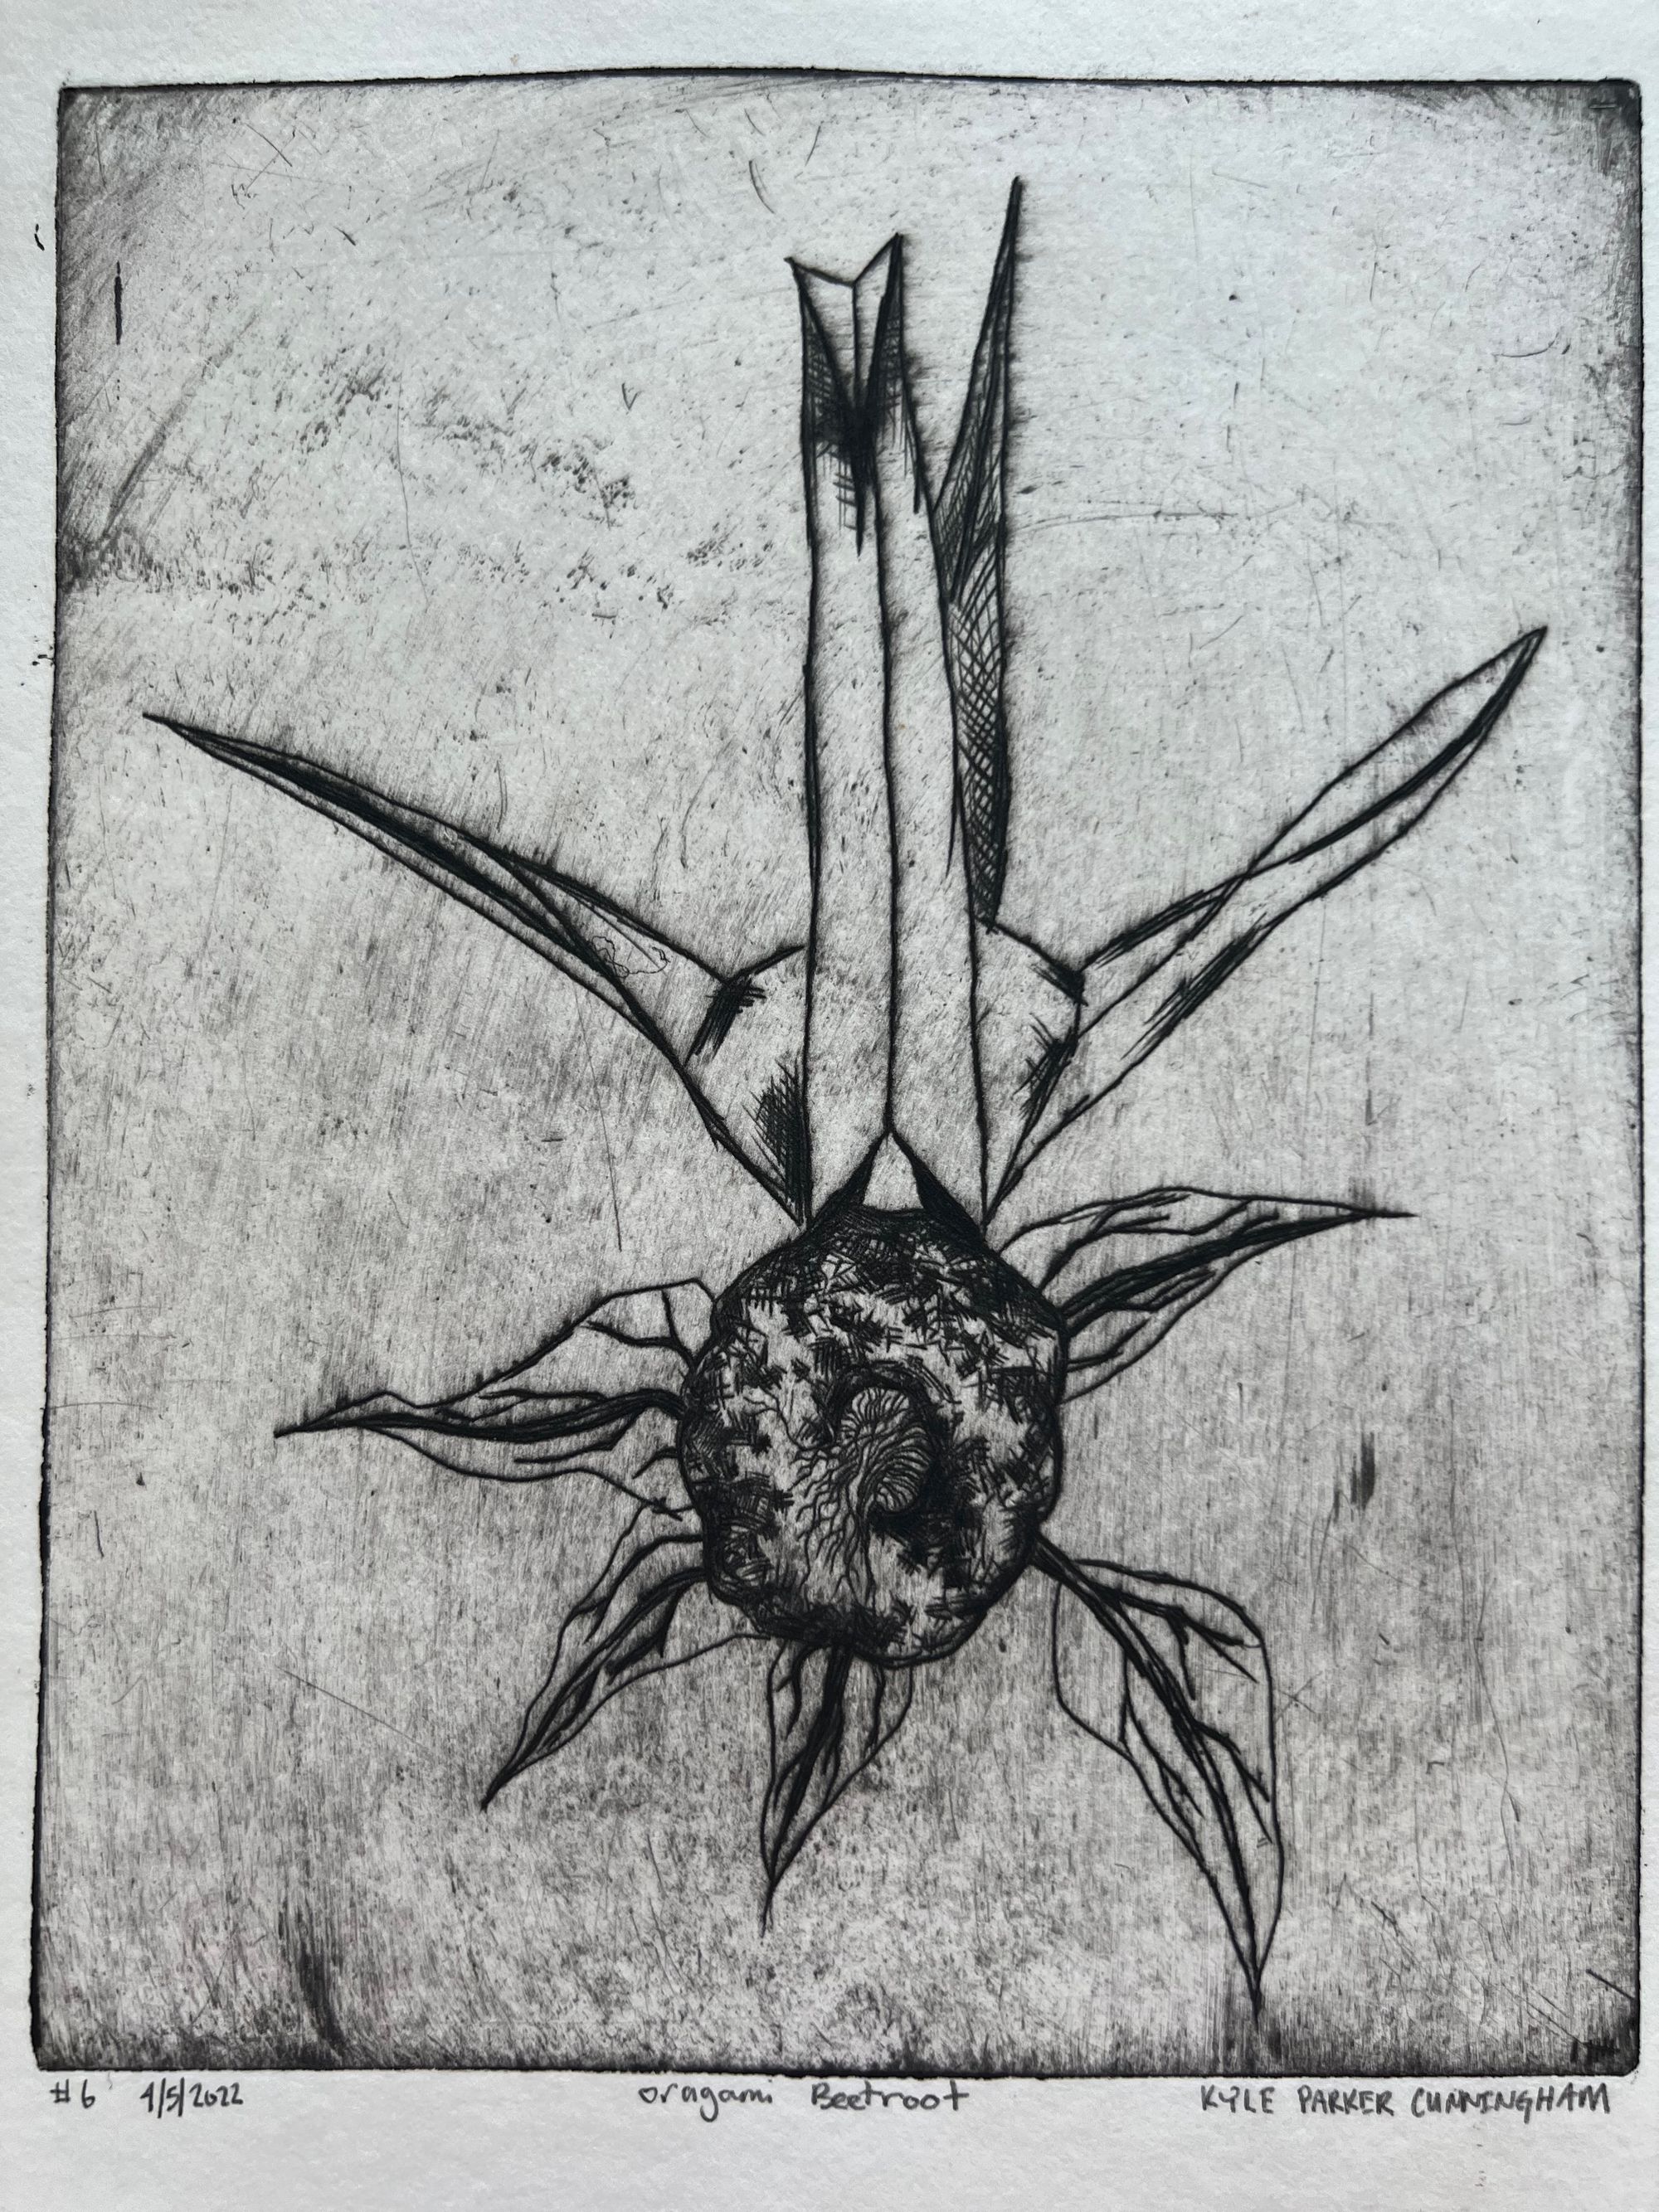 A origami crane carries a beetroot flying head on at the viewer in this black and white intaglio print.